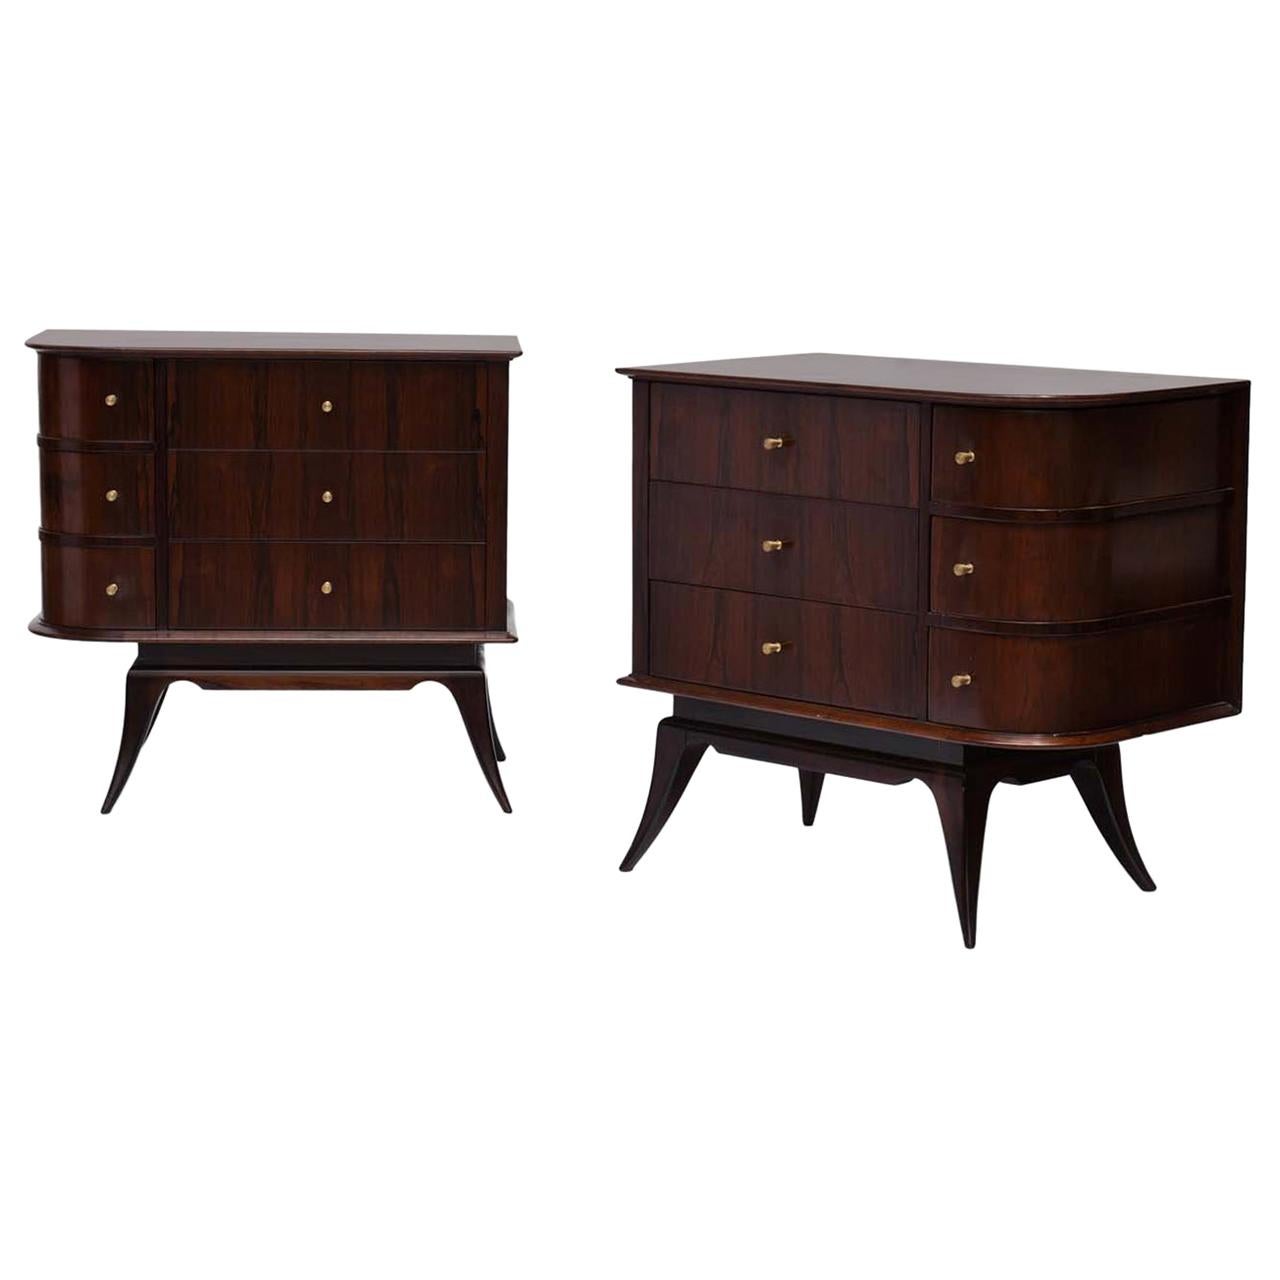 Giuseppe Scapinelli Midcentury Brazilian Commode with Rosewood Structure, 1950s